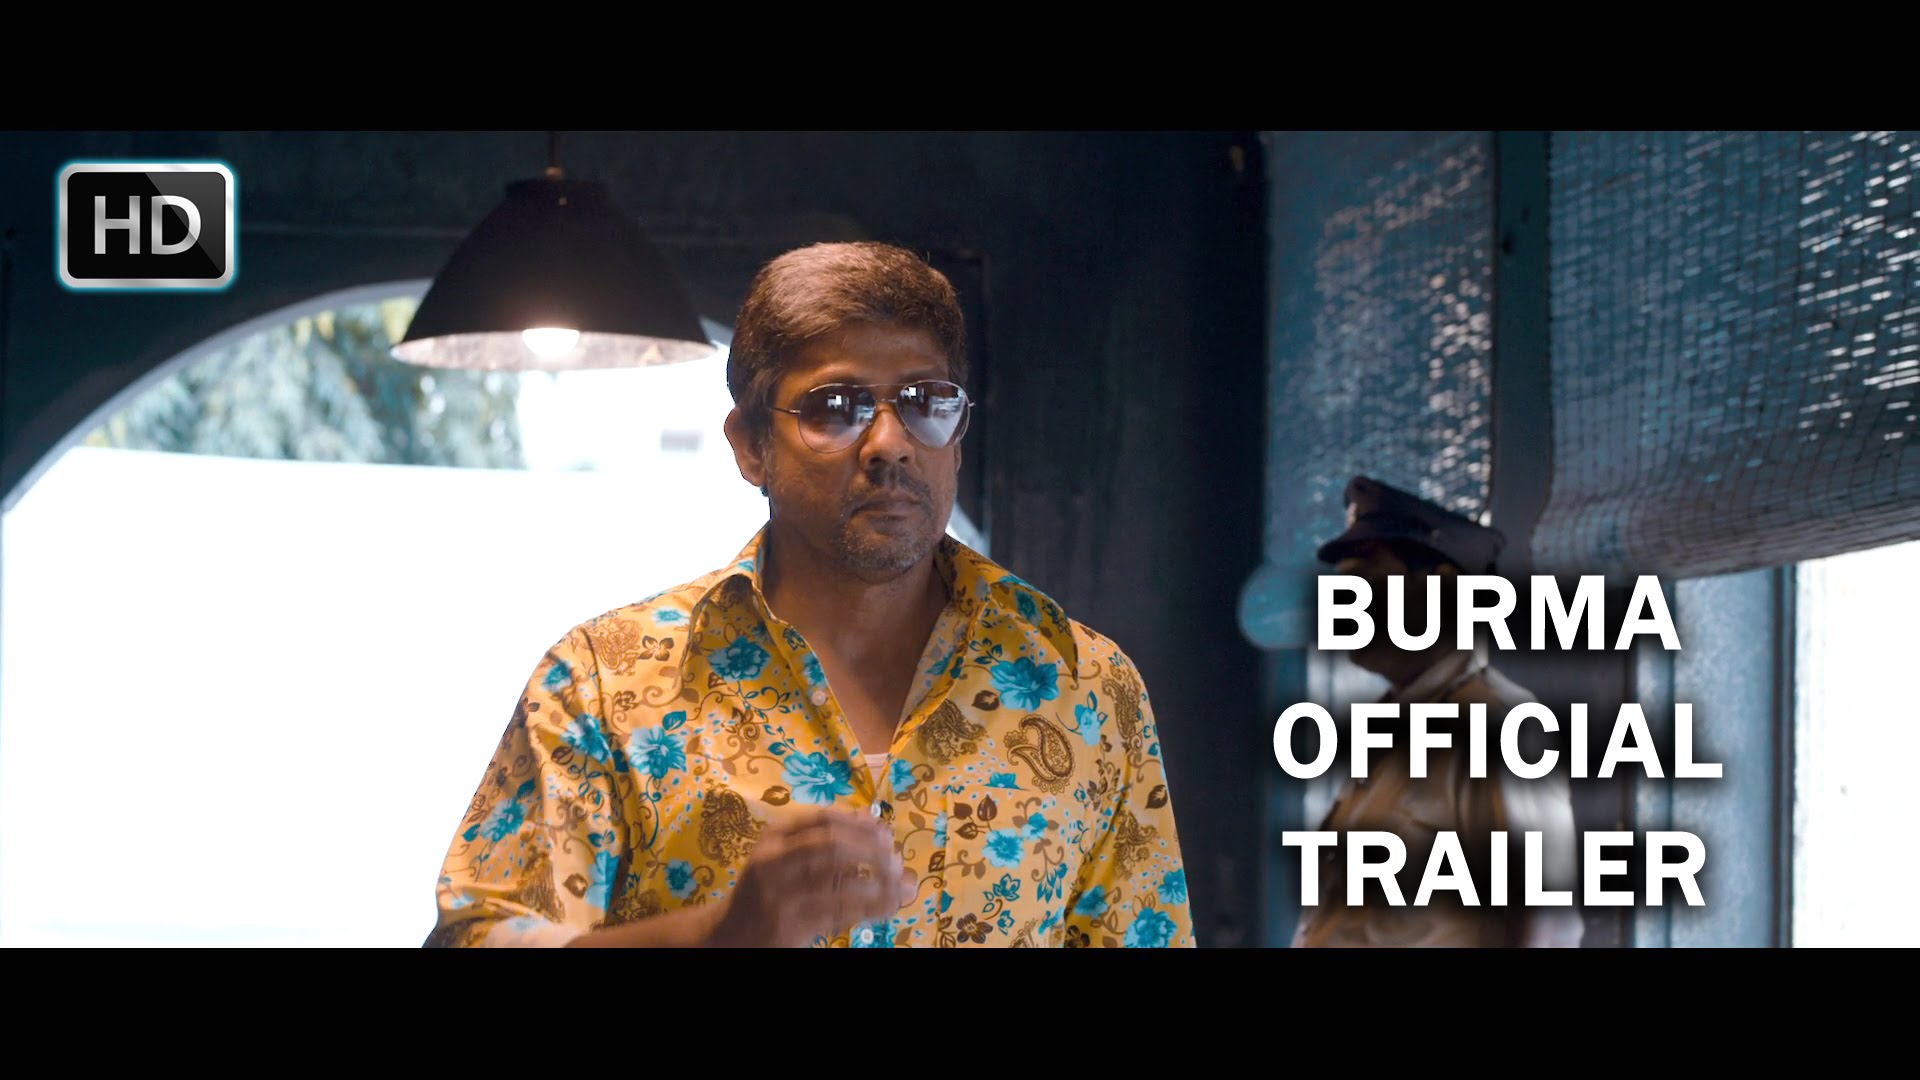 Burma Official Theatrical Trailer